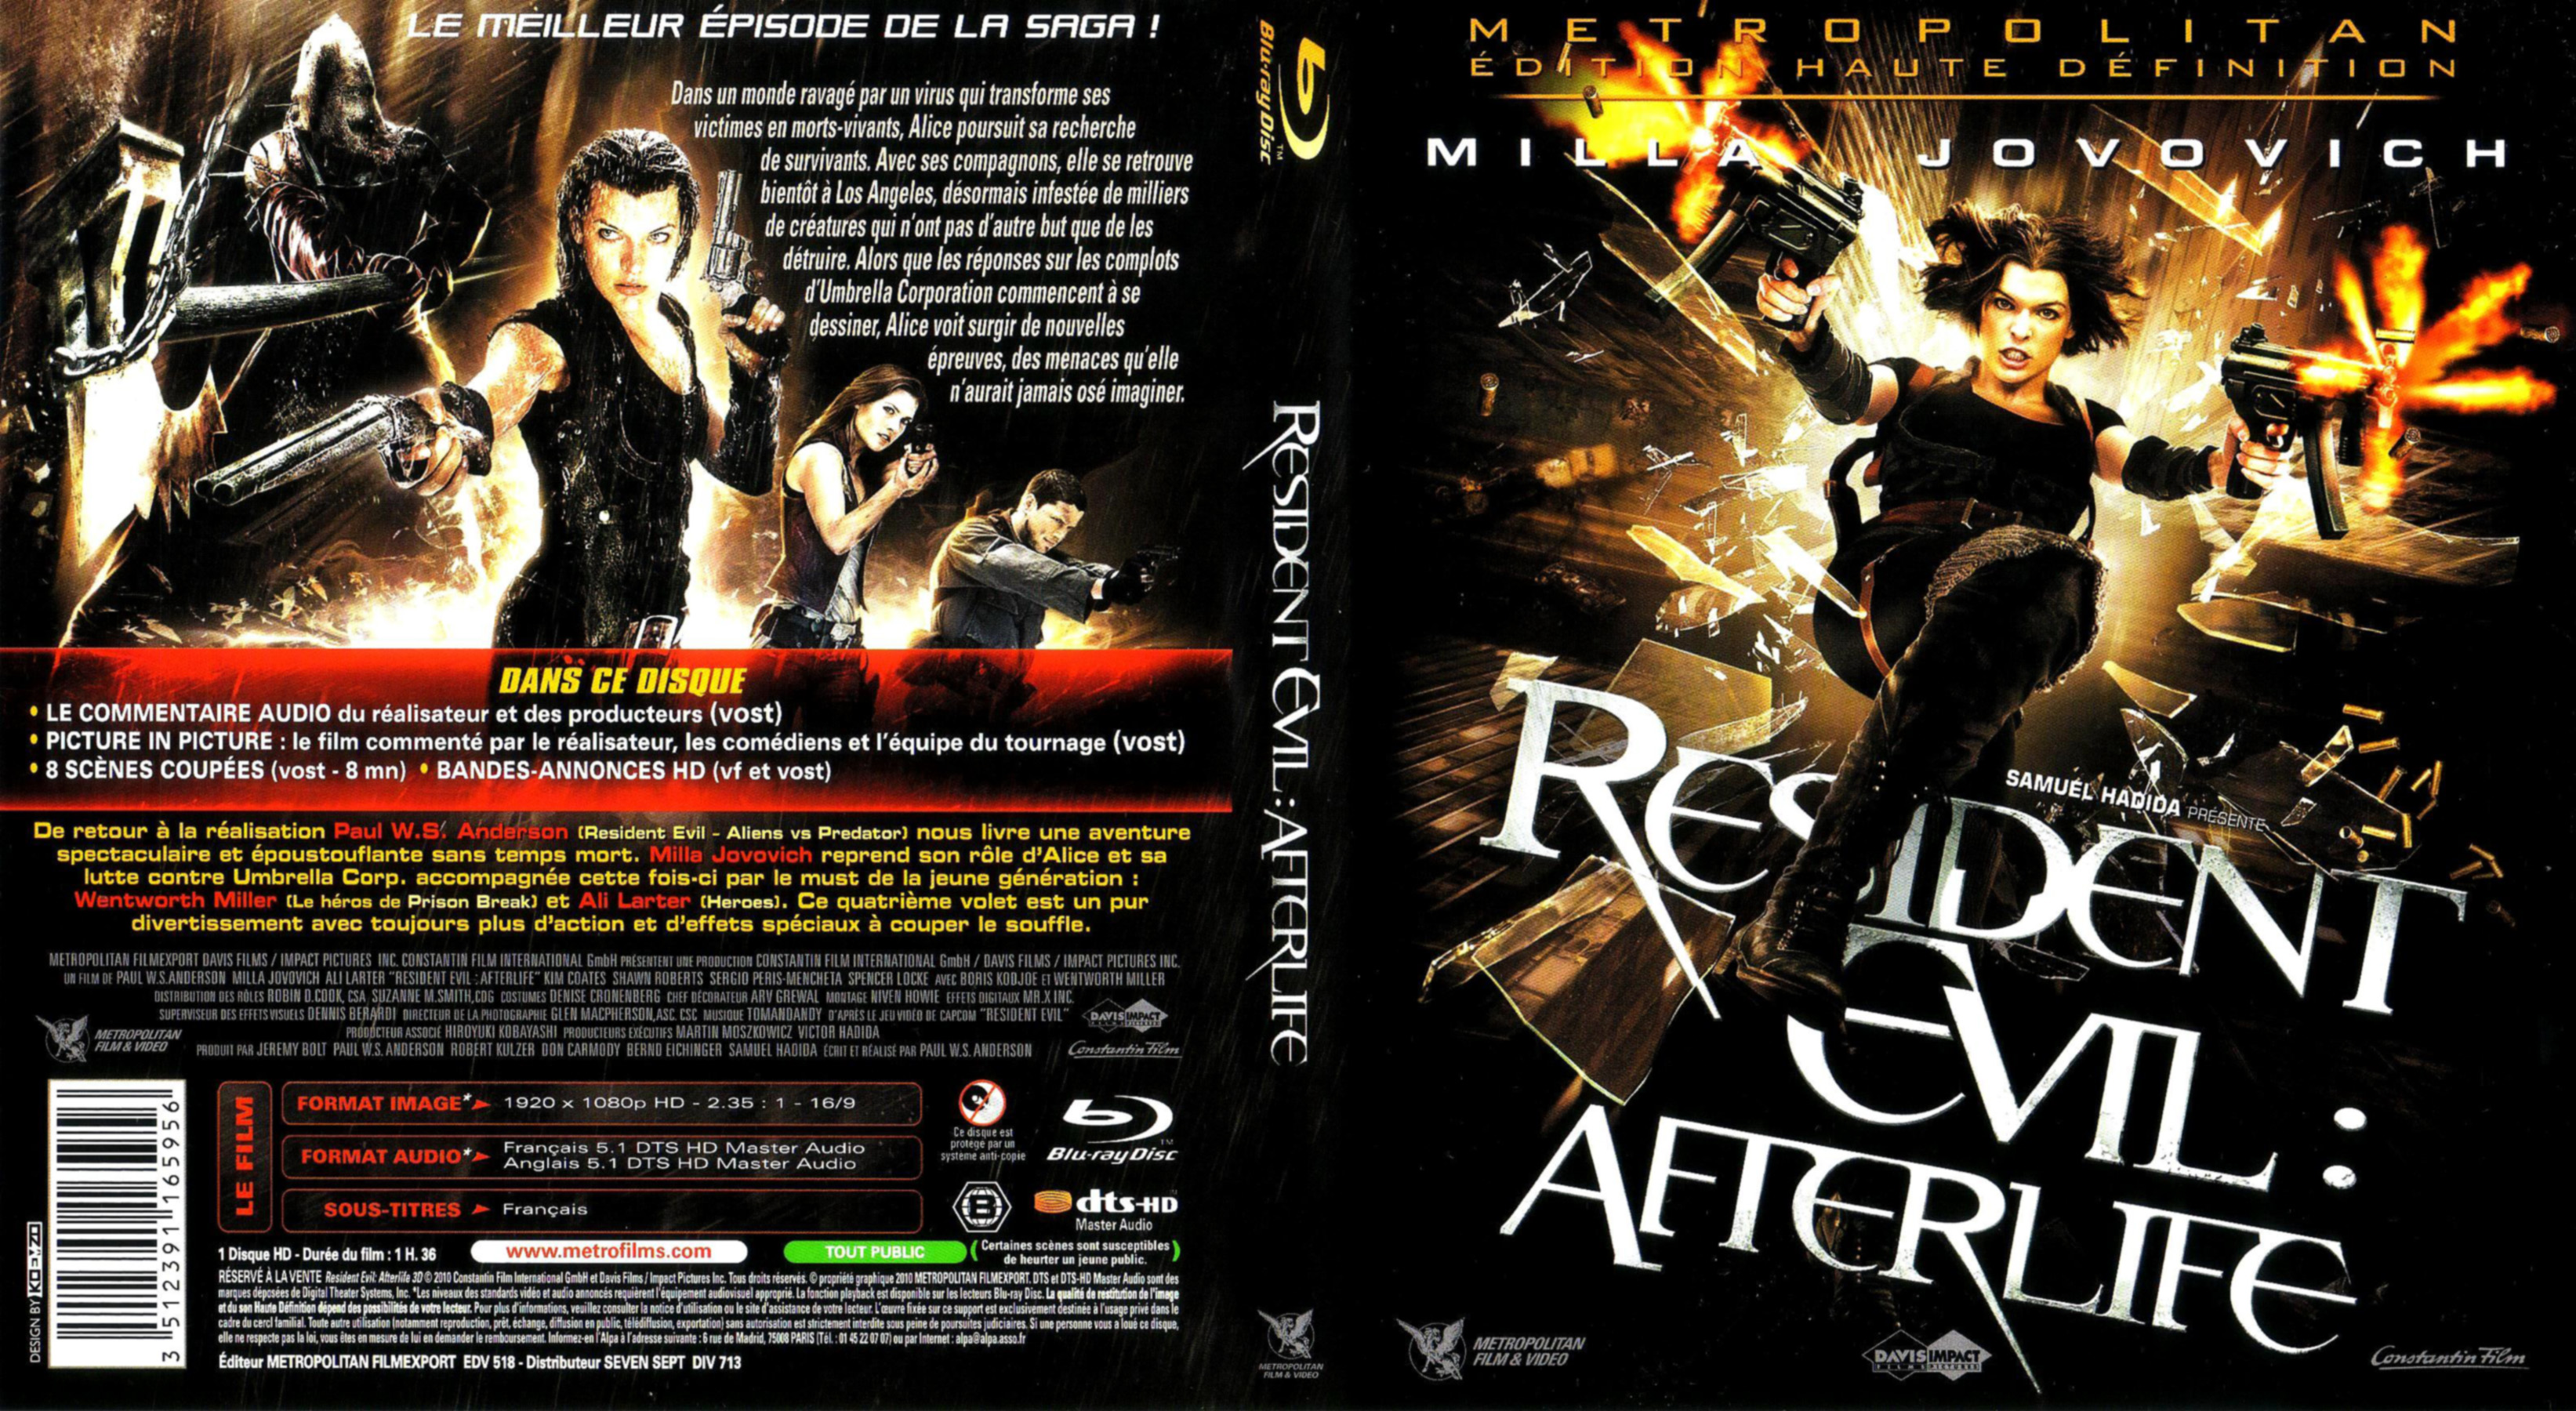 Jaquette DVD Resident Evil Afterlife (BLU-RAY)